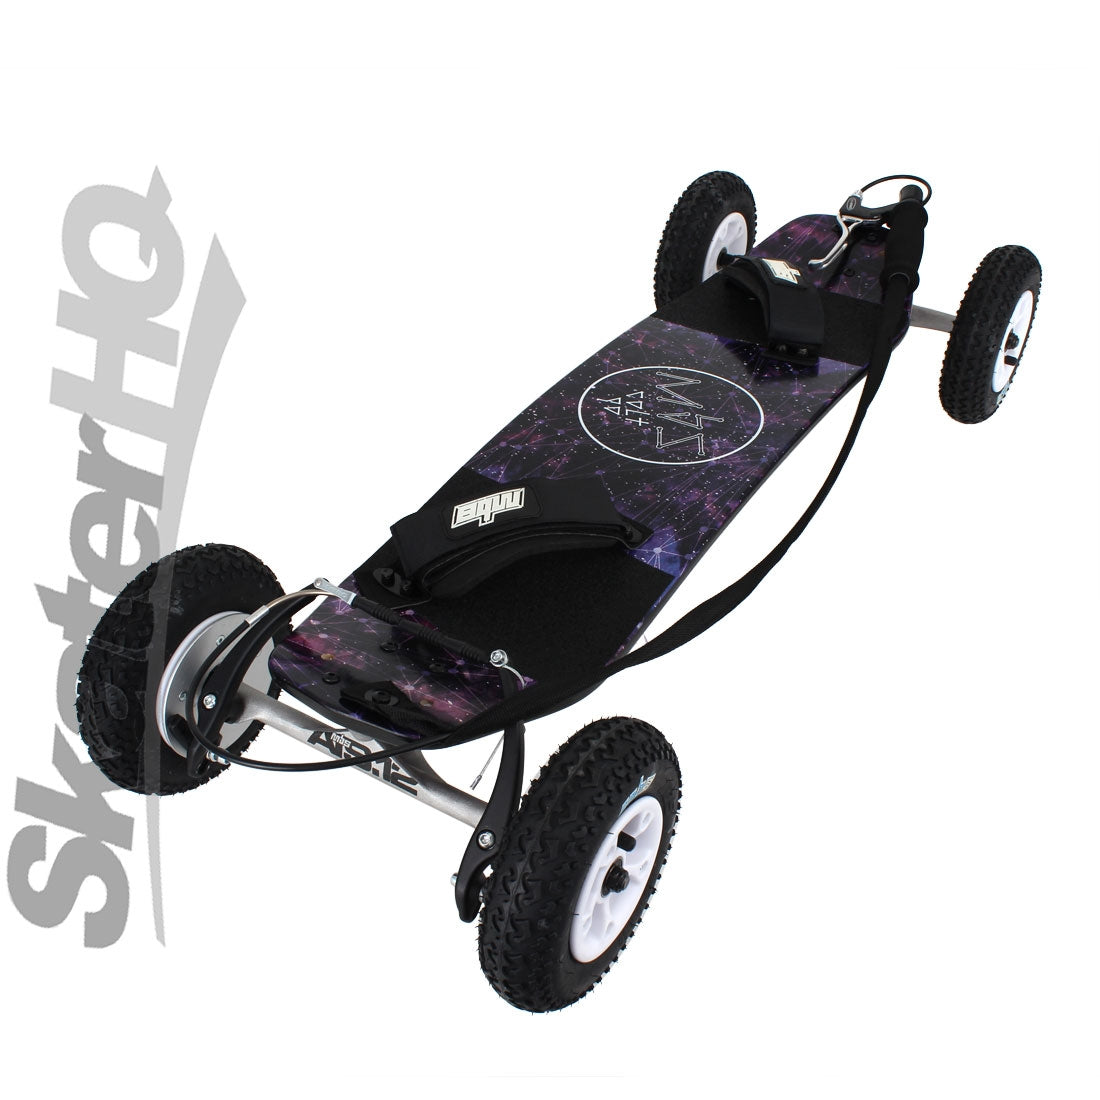 MBS Colt 90X Constellation Mountainboard Skateboard Compl Carving and Specialty